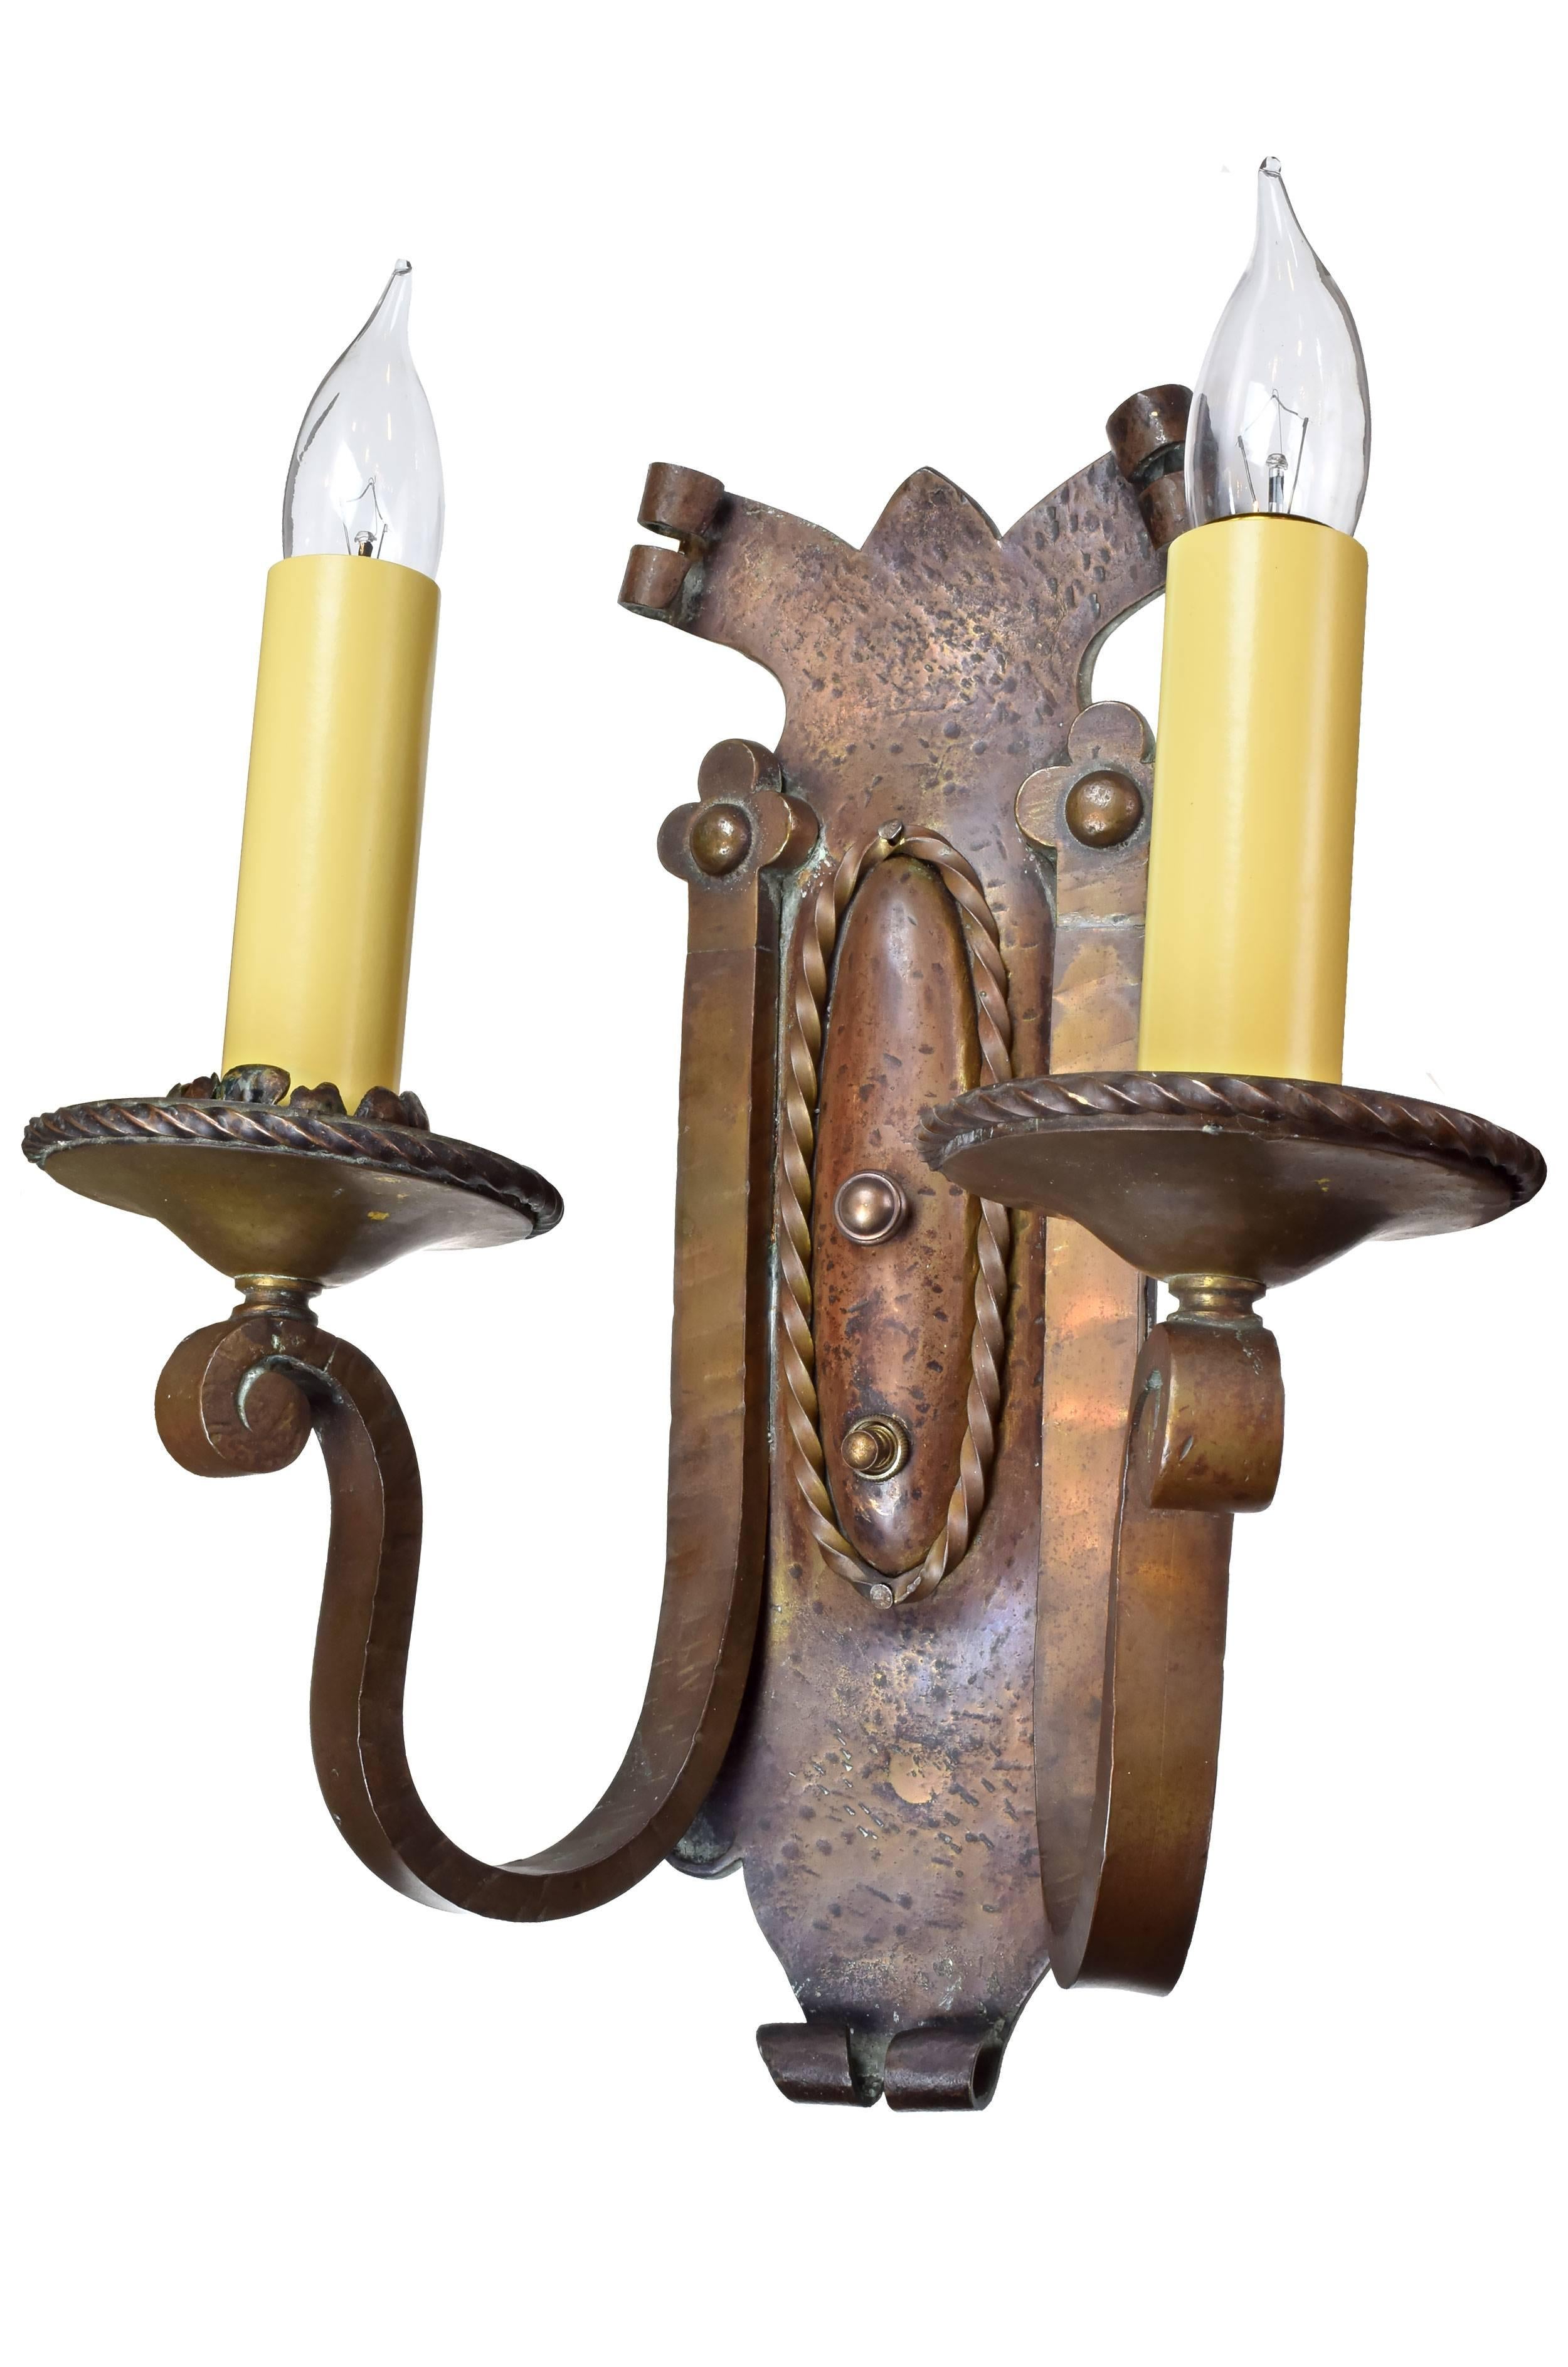 These heavy hammered brass two candle Tudor sconces feature attractive, curving lines throughout and organic ornamentation surrounding the candlesticks. These fixtures are gorgeous on their own and even more striking when grouped together,

circa